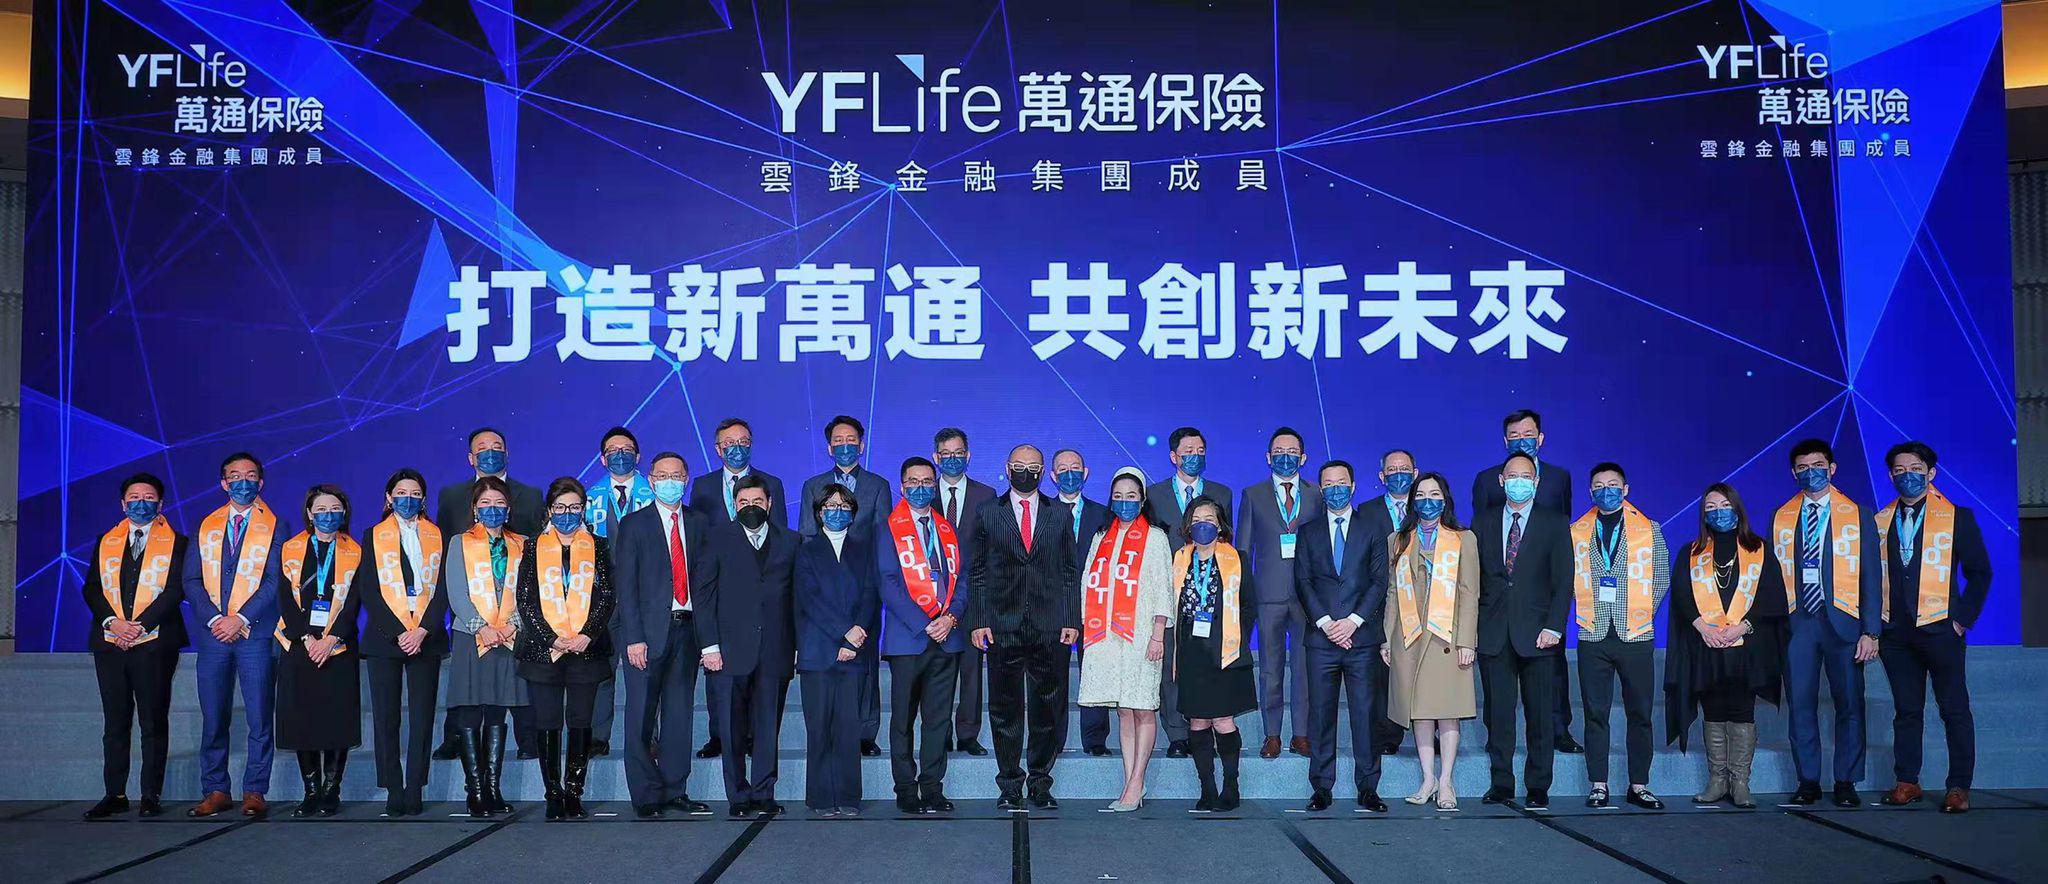 Mr. Zhang Ke, Managing Director and Chief Executive Officer of YF Life, attends the “New YF Life．New Future” conference with the management team and elite consultants.